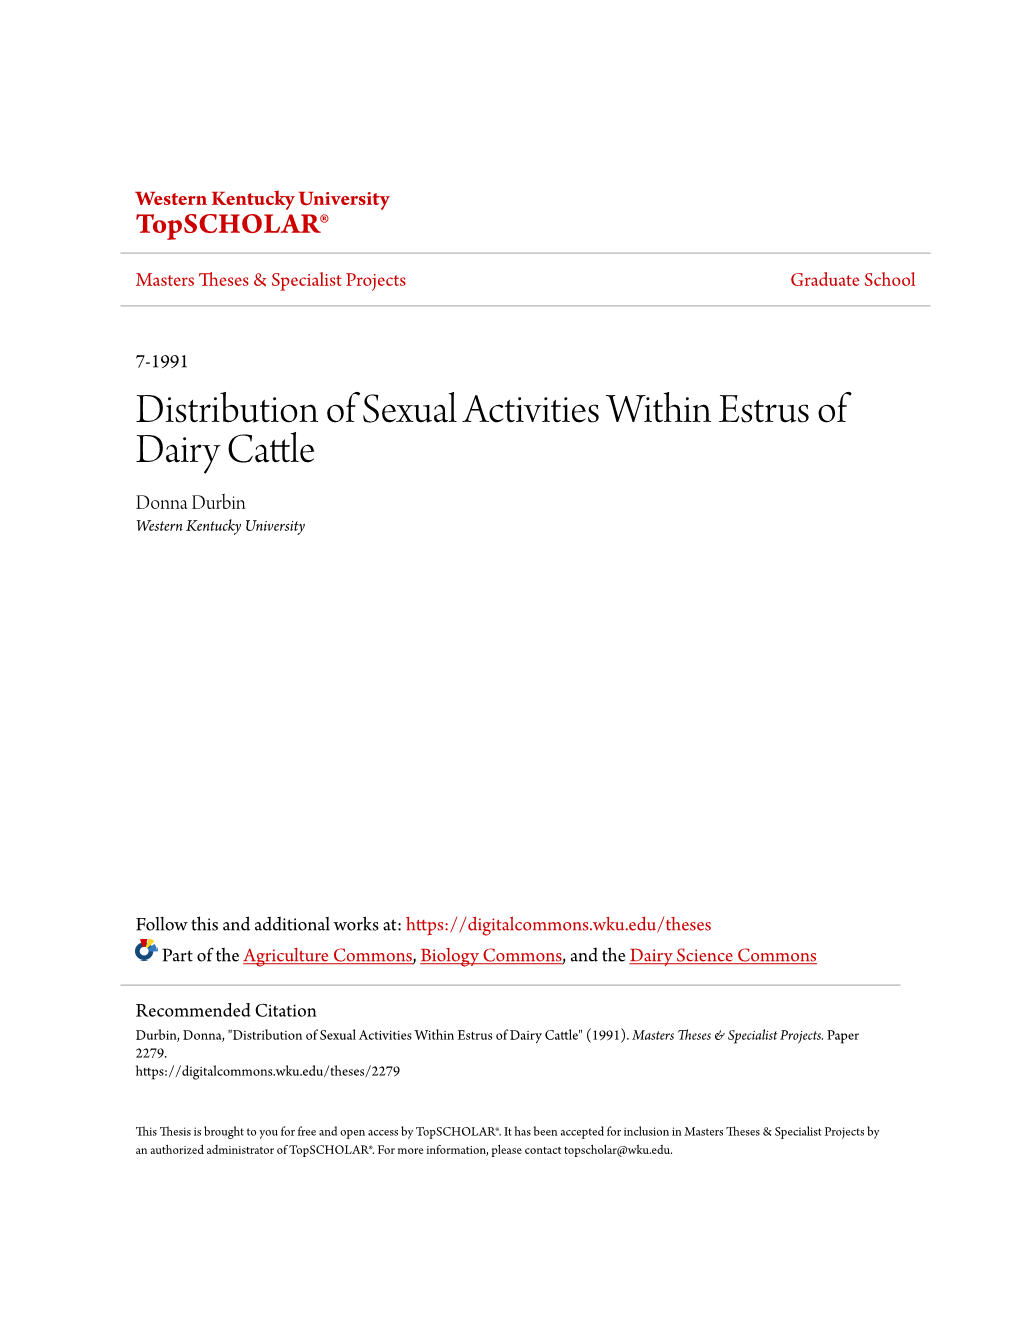 Distribution of Sexual Activities Within Estrus of Dairy Cattle Donna Durbin Western Kentucky University